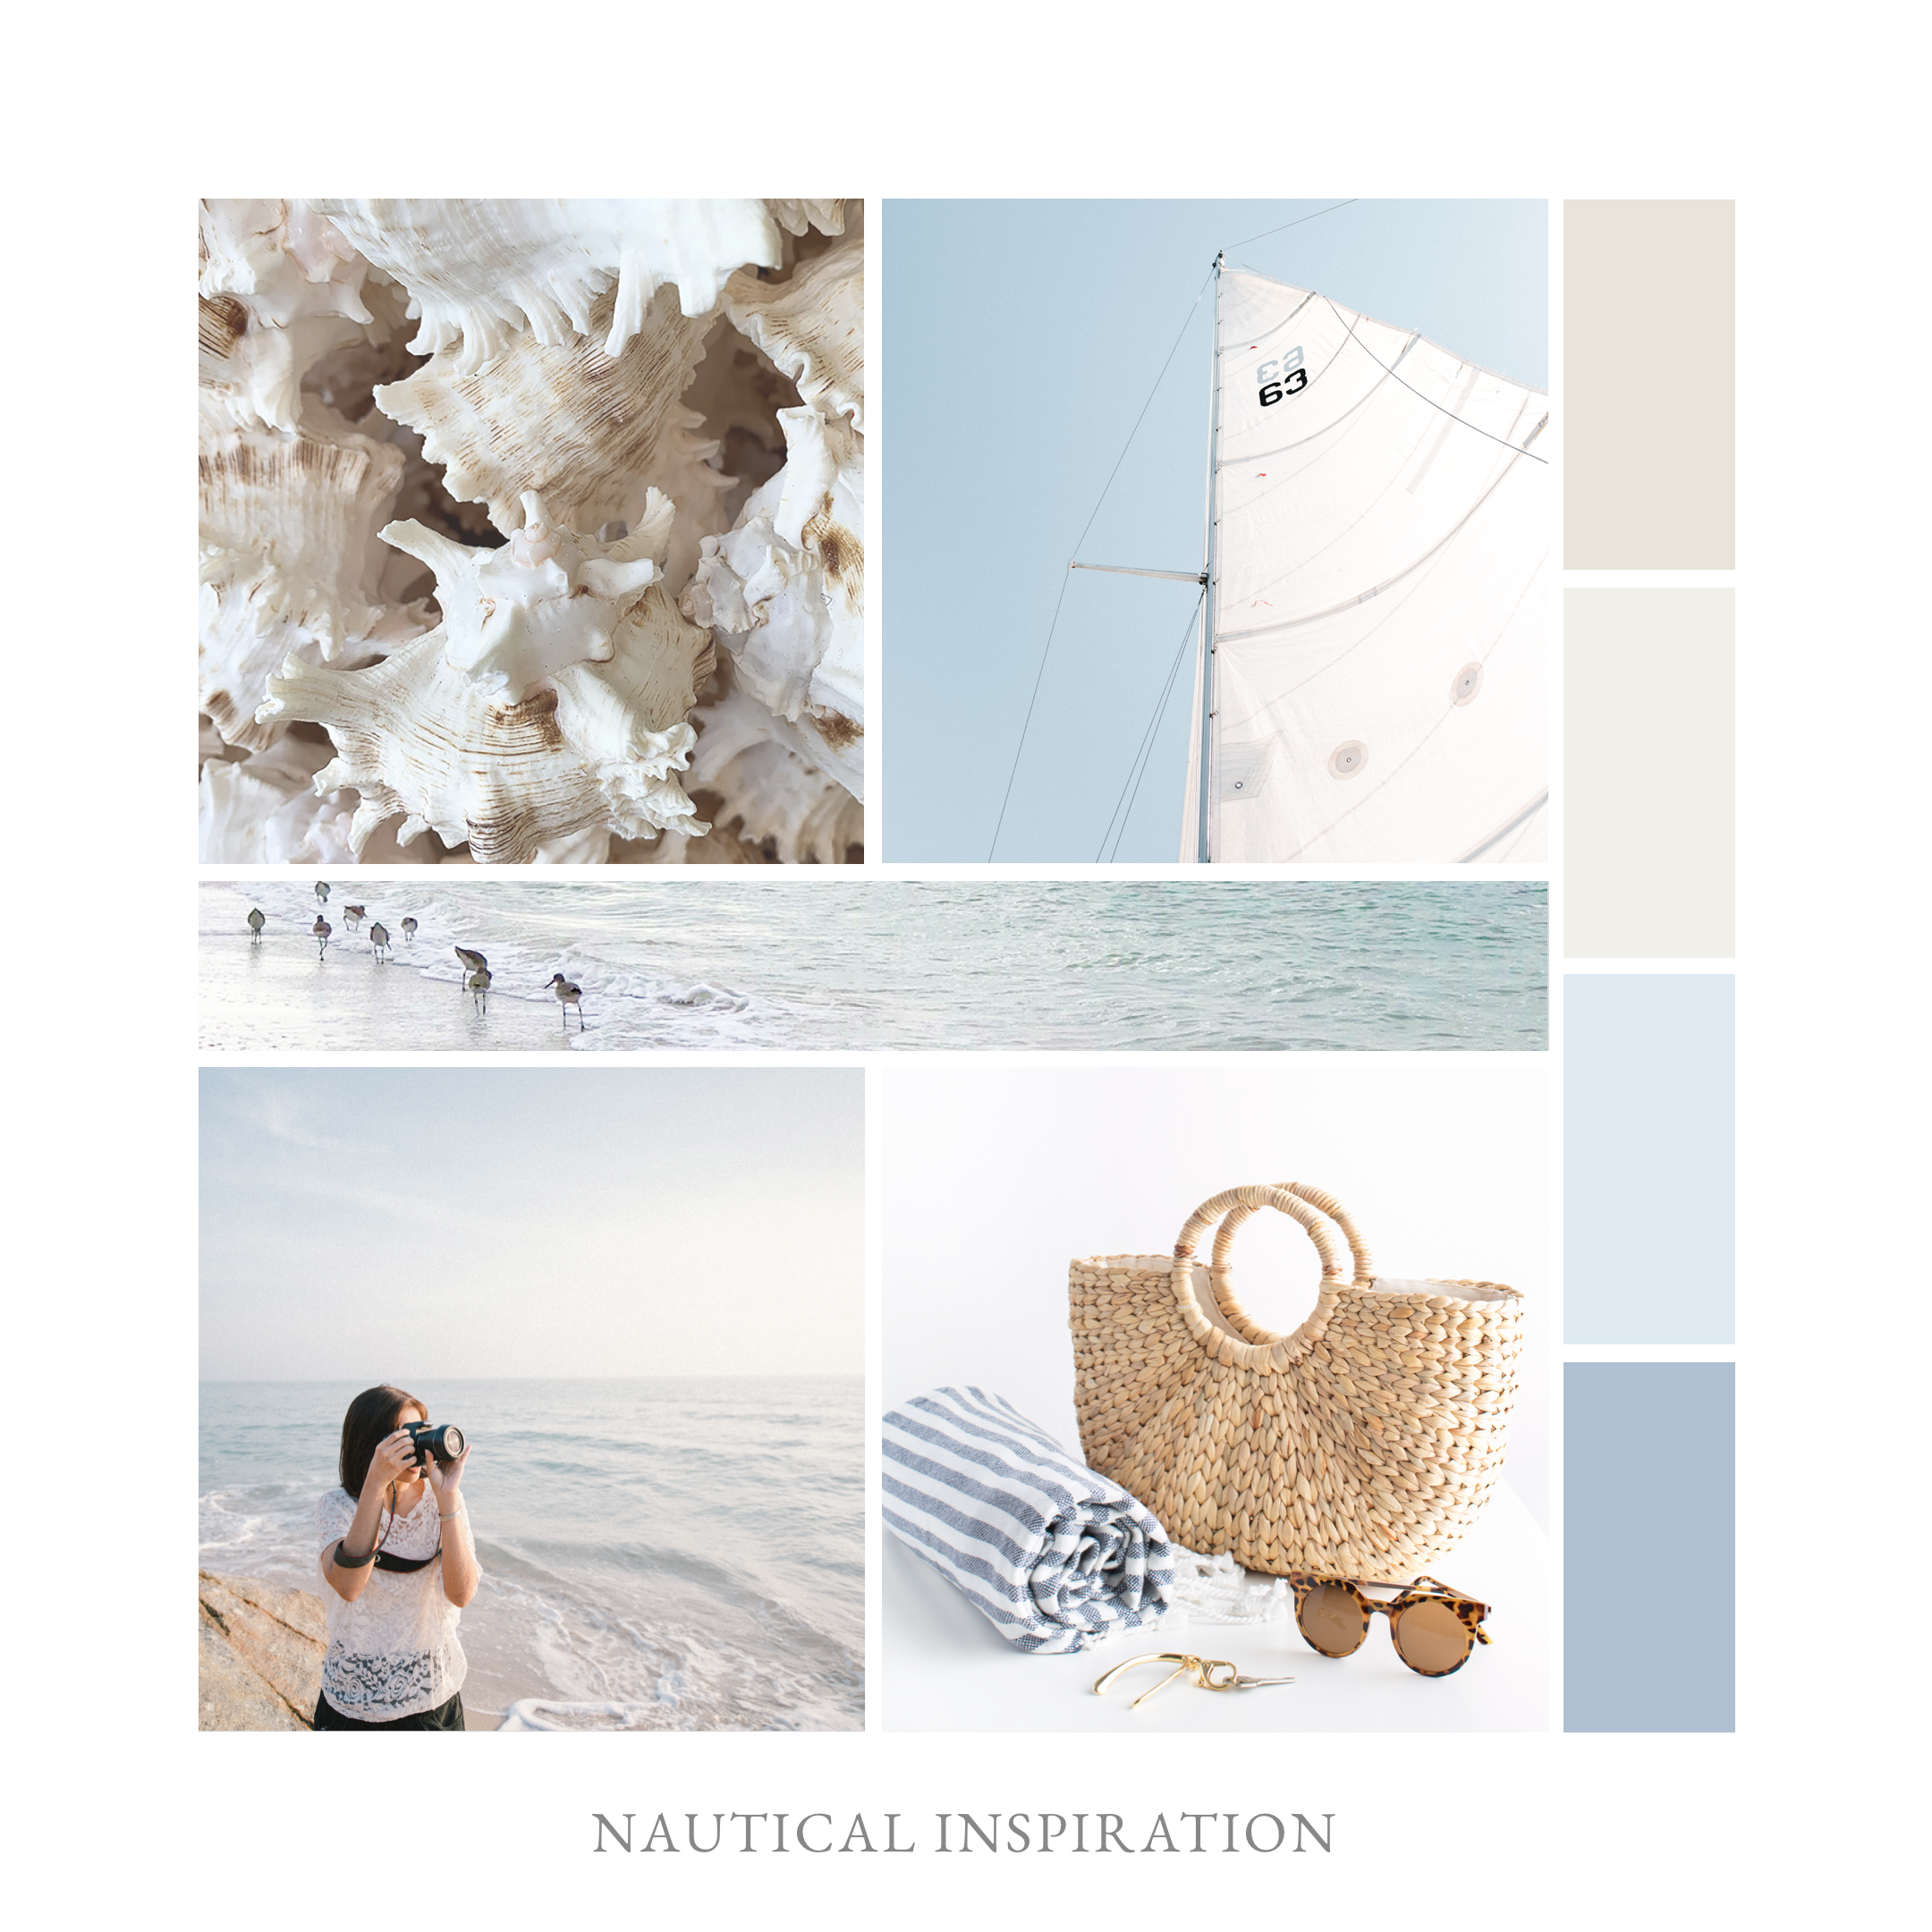 Mood board featuring nautical and beach elements with calming blues and sand tones